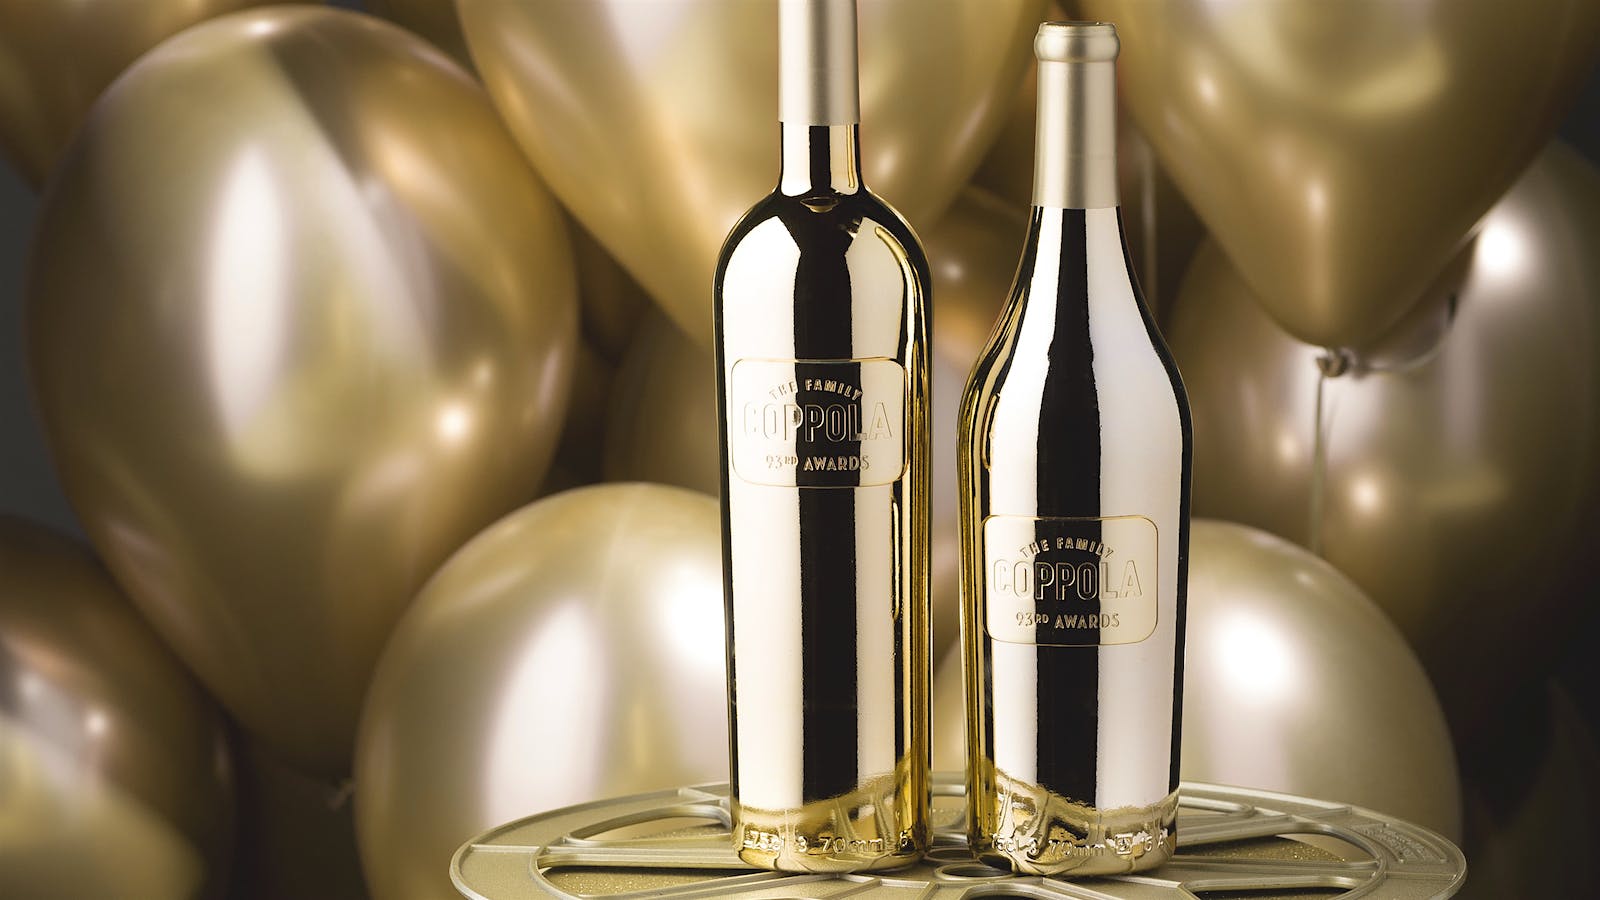 Oscars Light Up with Piper-Heidsieck Champagne and Gold Coppola Bottles